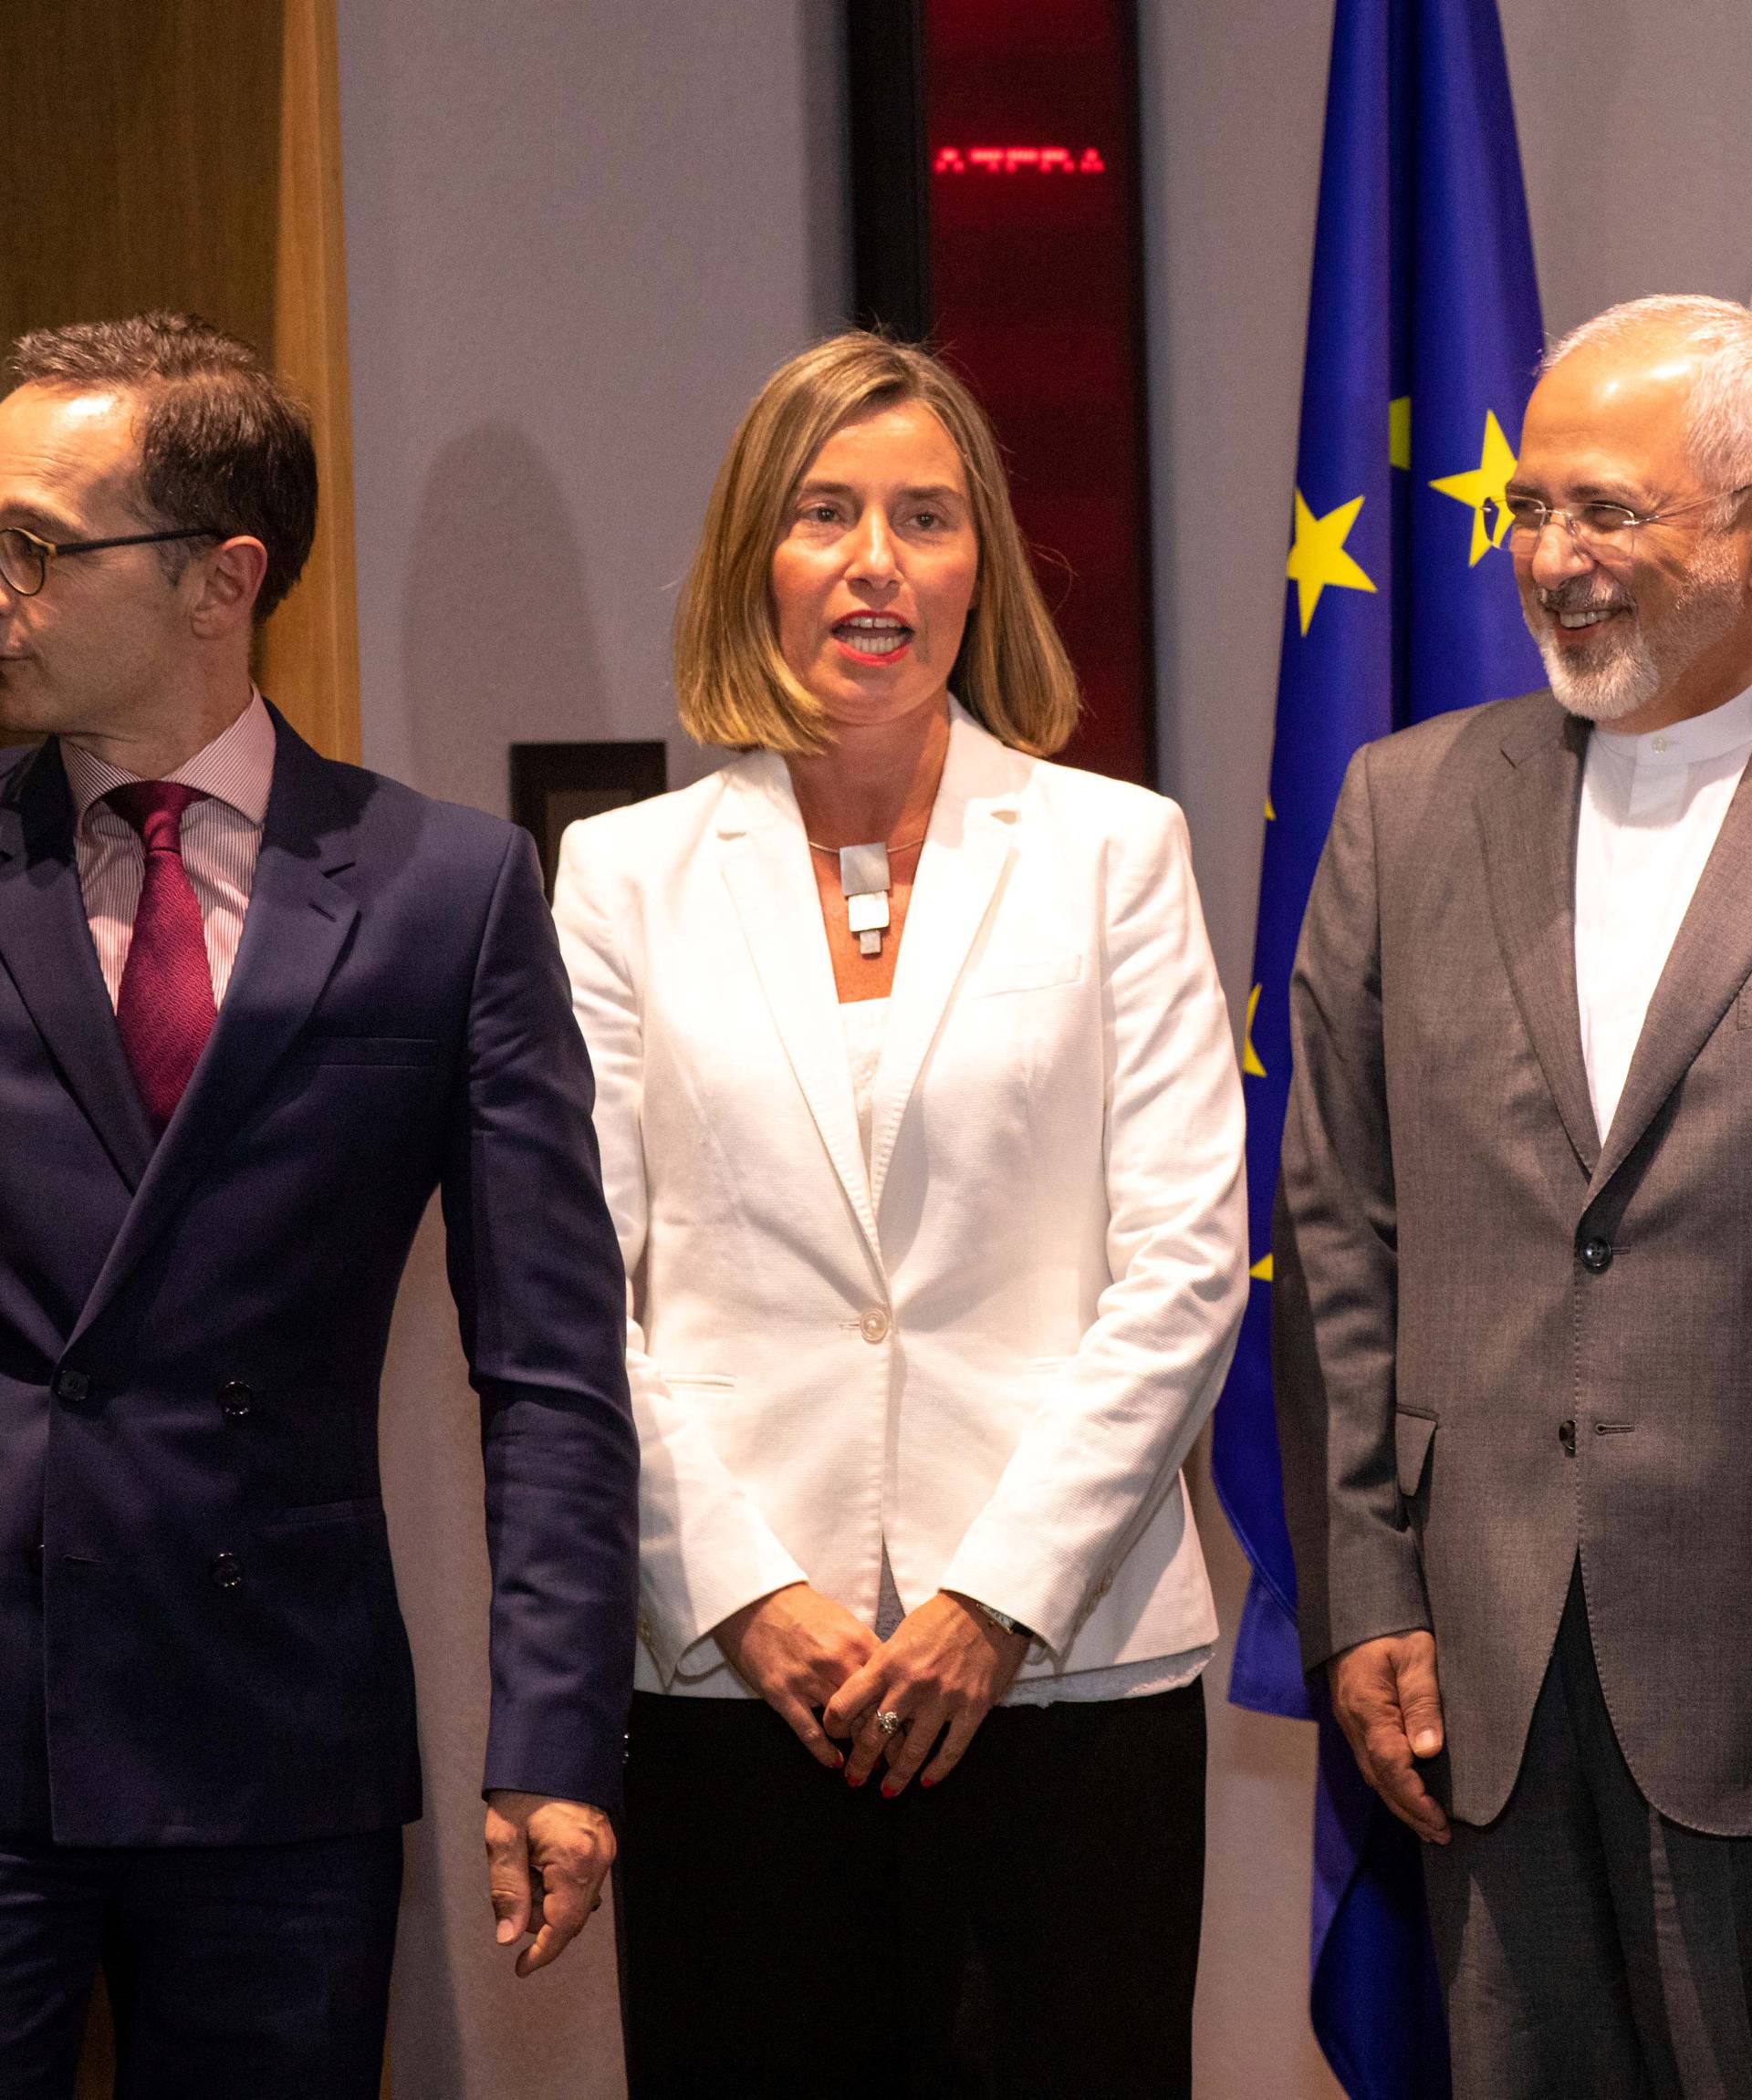 Britain's Foreign Secretary Johnson, German Foreign Minister Maas, French Foreign Minister Le Drian and EU High Representative for Foreign Affairs Mogherini take part in a meeting with Iran's Foreign Minister Mohammad Javad Zarif in Brussels